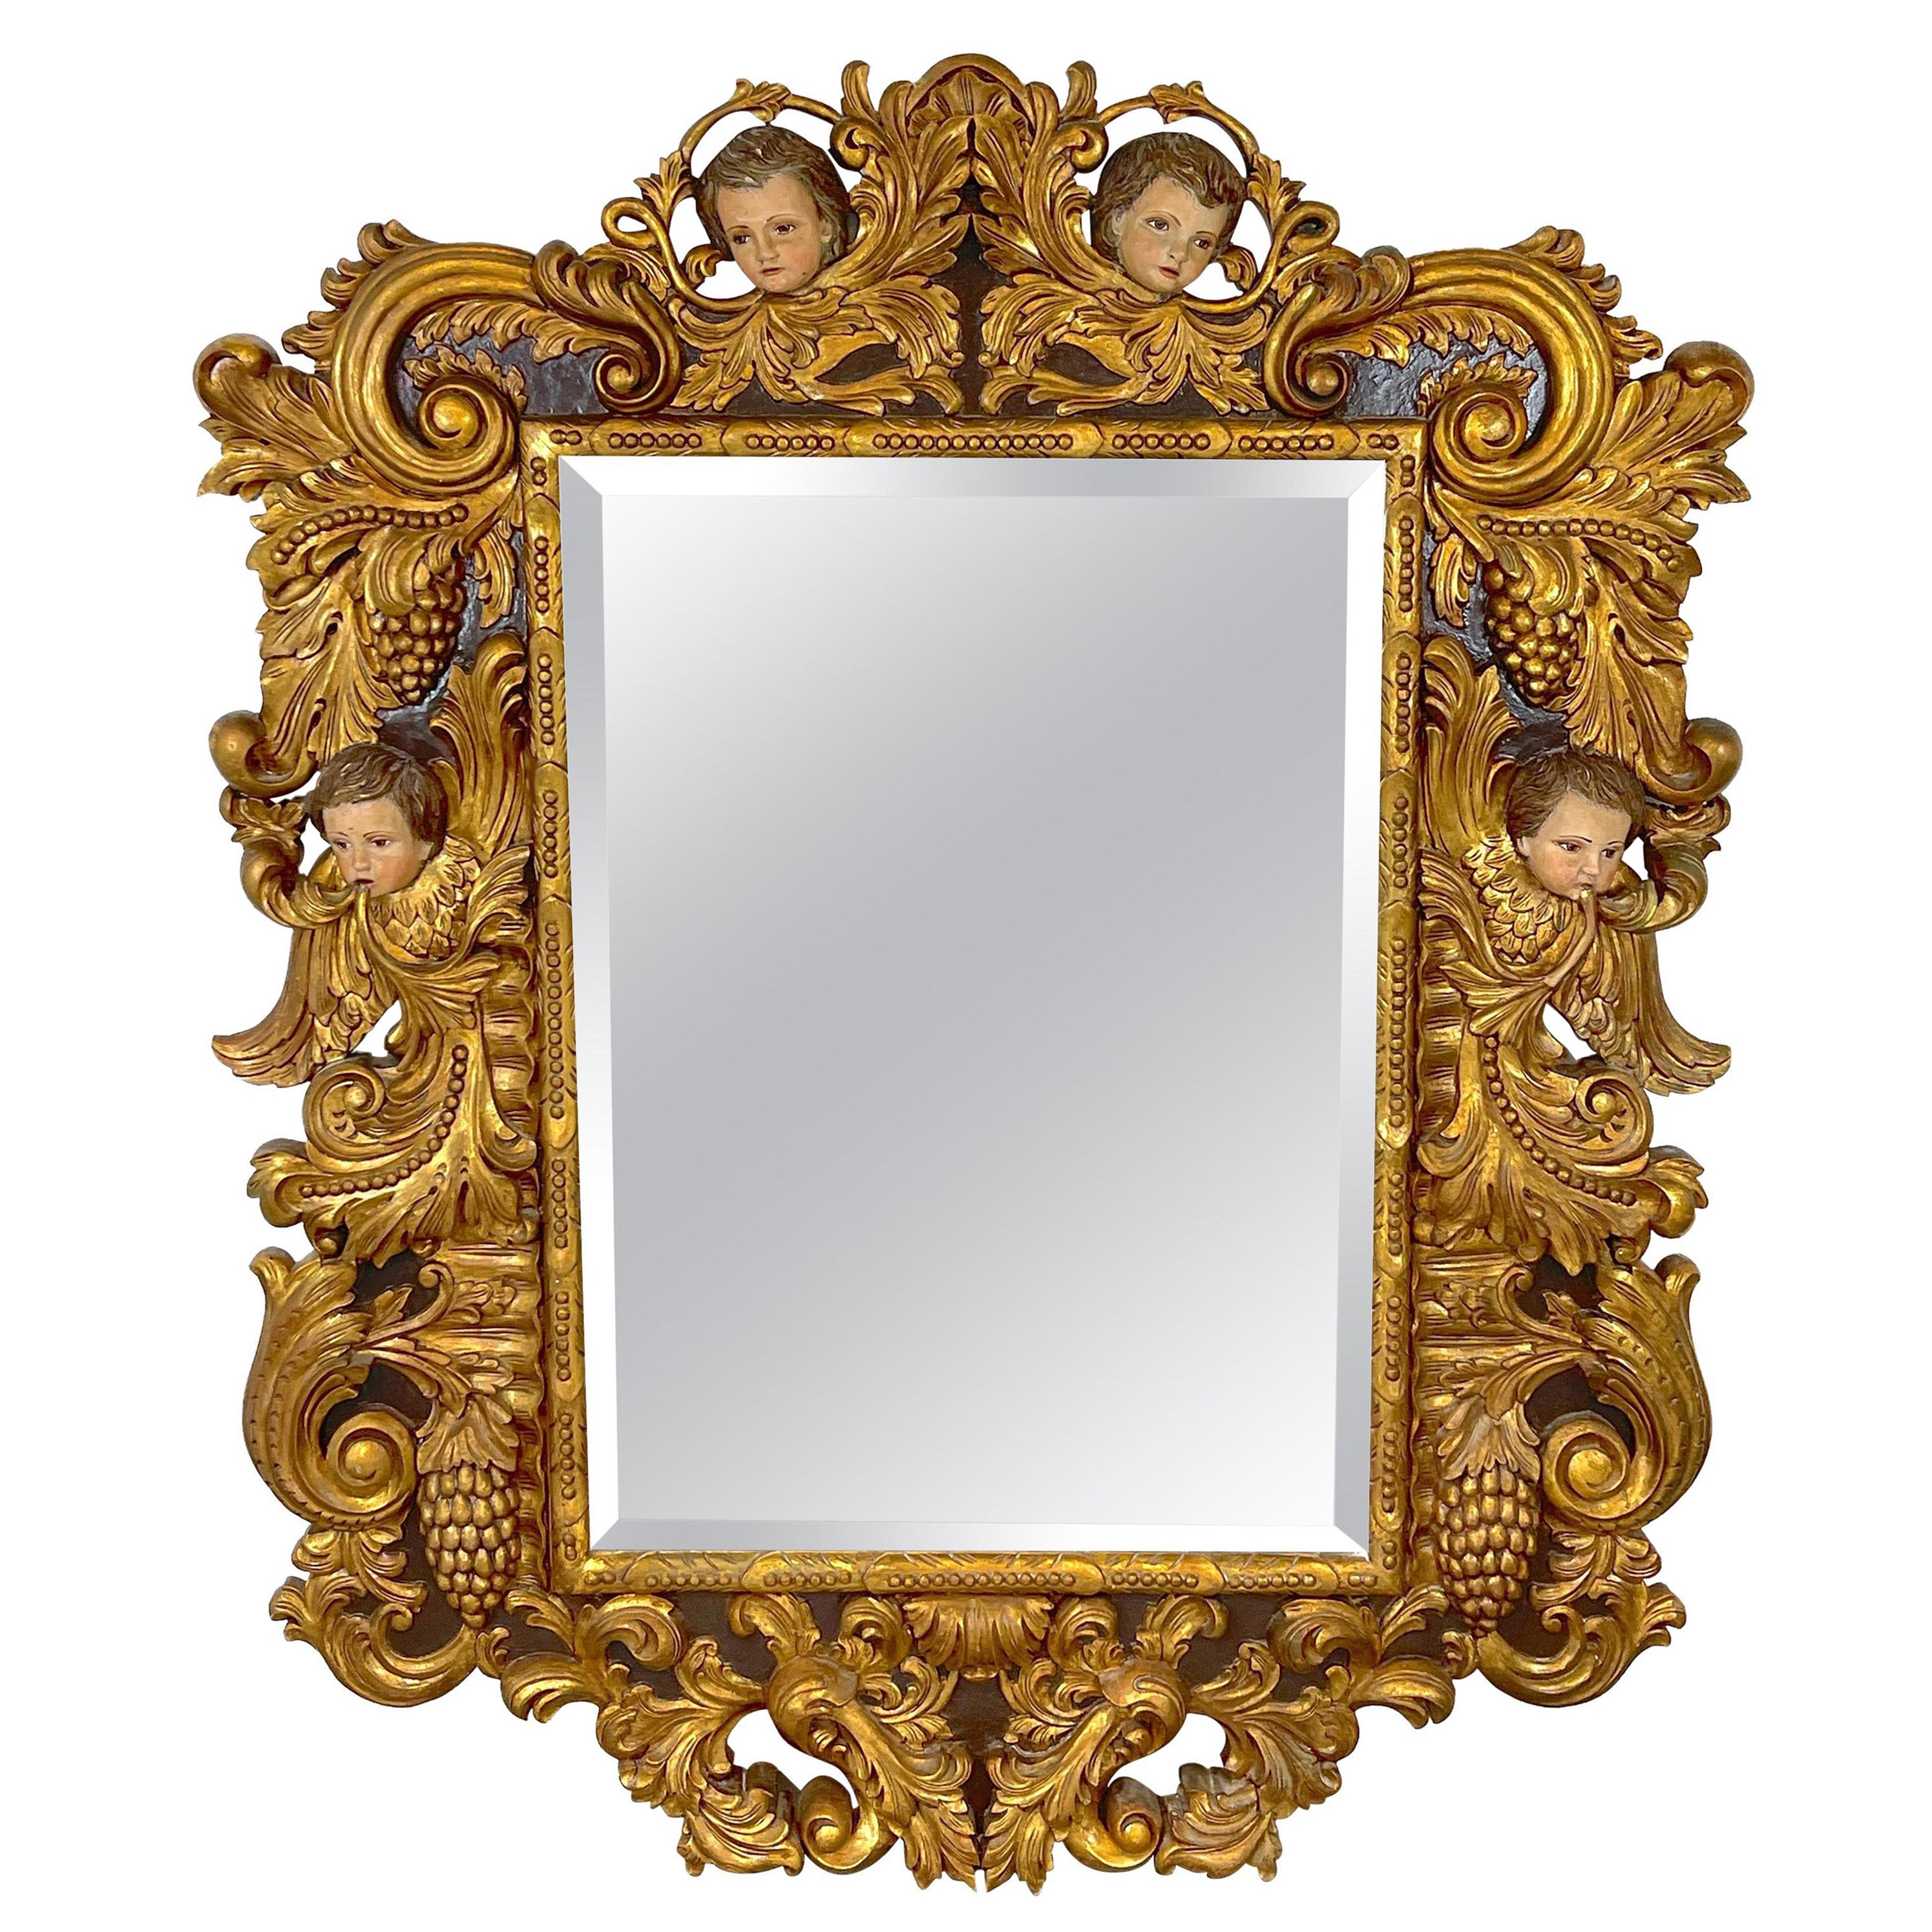 Palatial Italian Carved Figural Giltwood & Polychromed Baroque Style Mirror For Sale